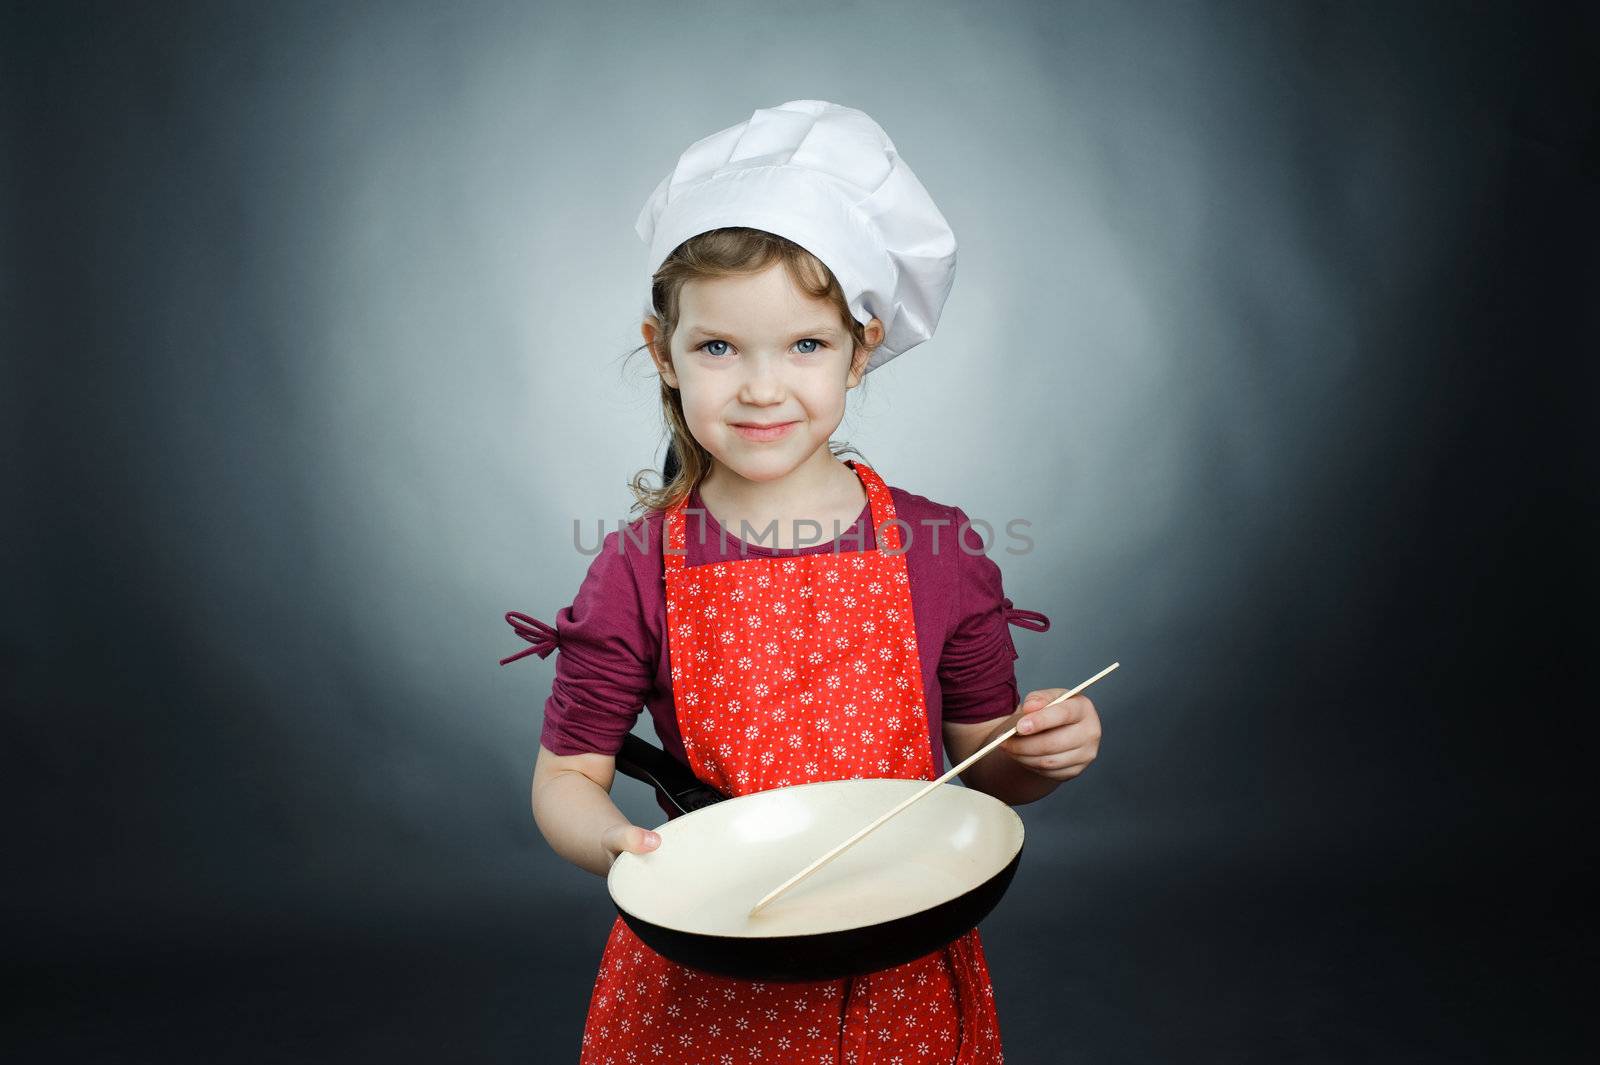 An image of a little girl in white hat with frying pan